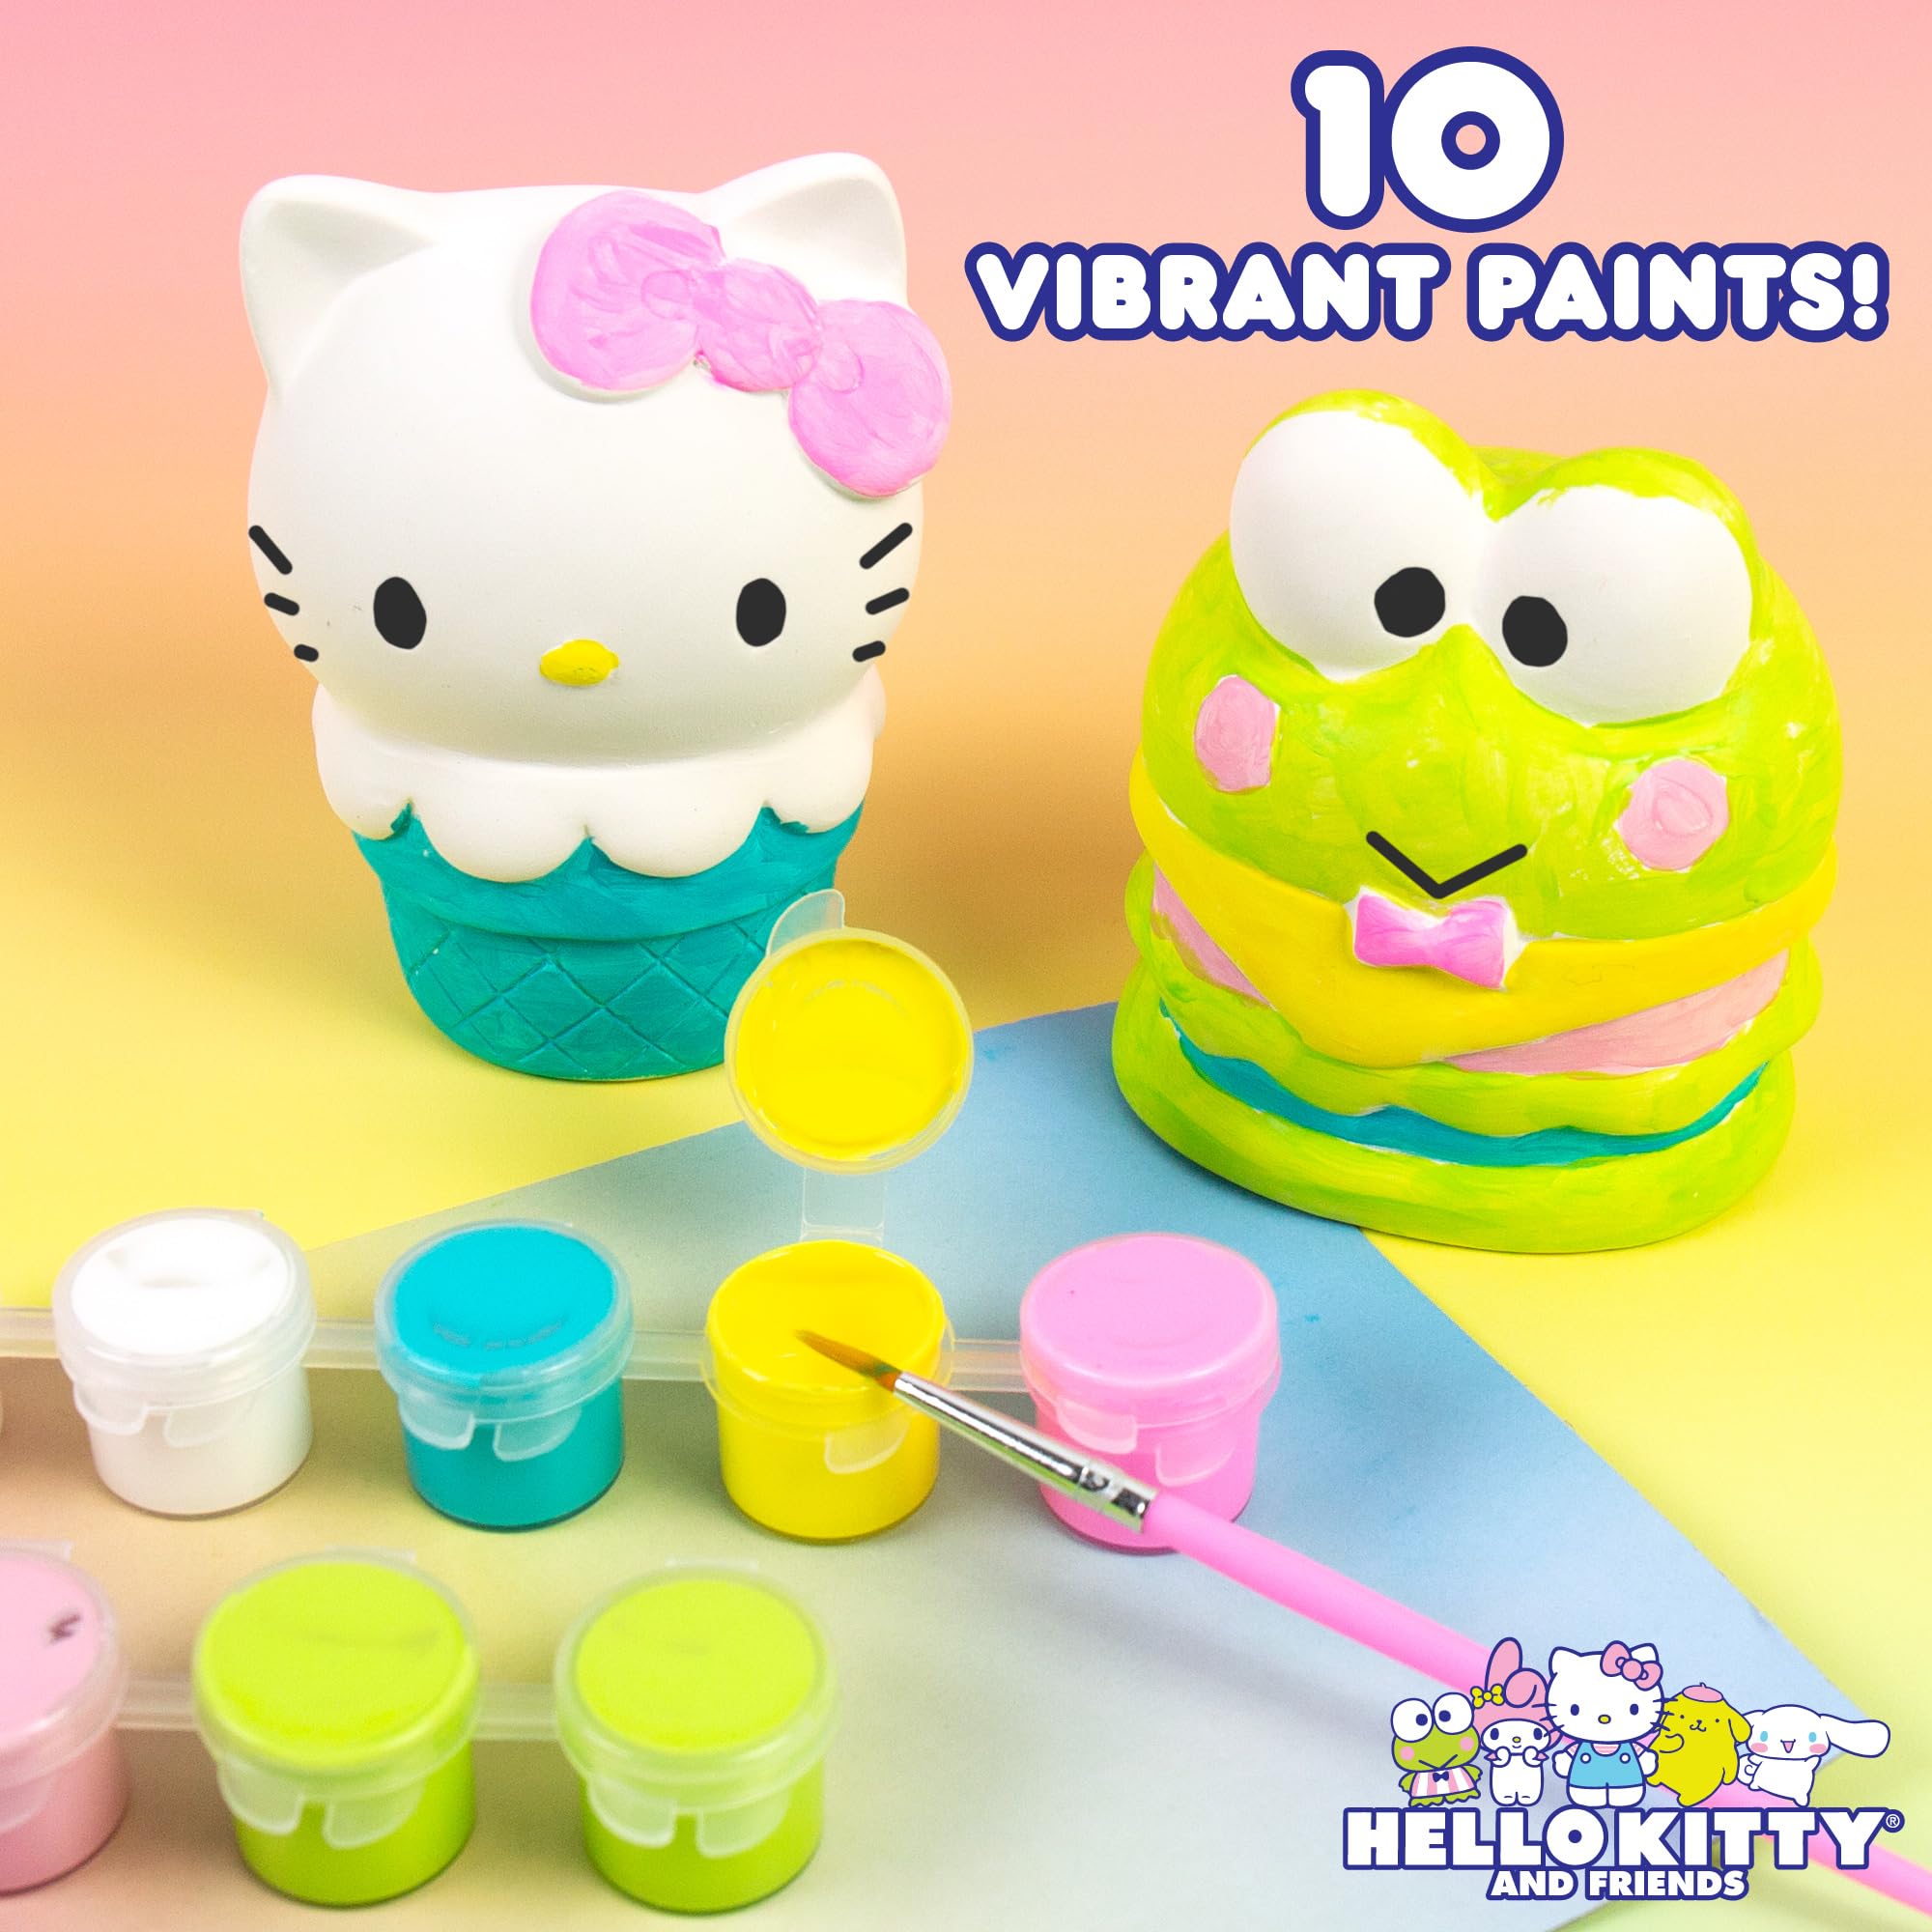 Hello Kitty Sanrio and Friends Paint Your Own Figurines Arts and Crafts Kit, Ceramic Paintable Keroppi, Kawaii Painting Kit for Kids, Craft Kits for Kids 8-12, Ages 8+